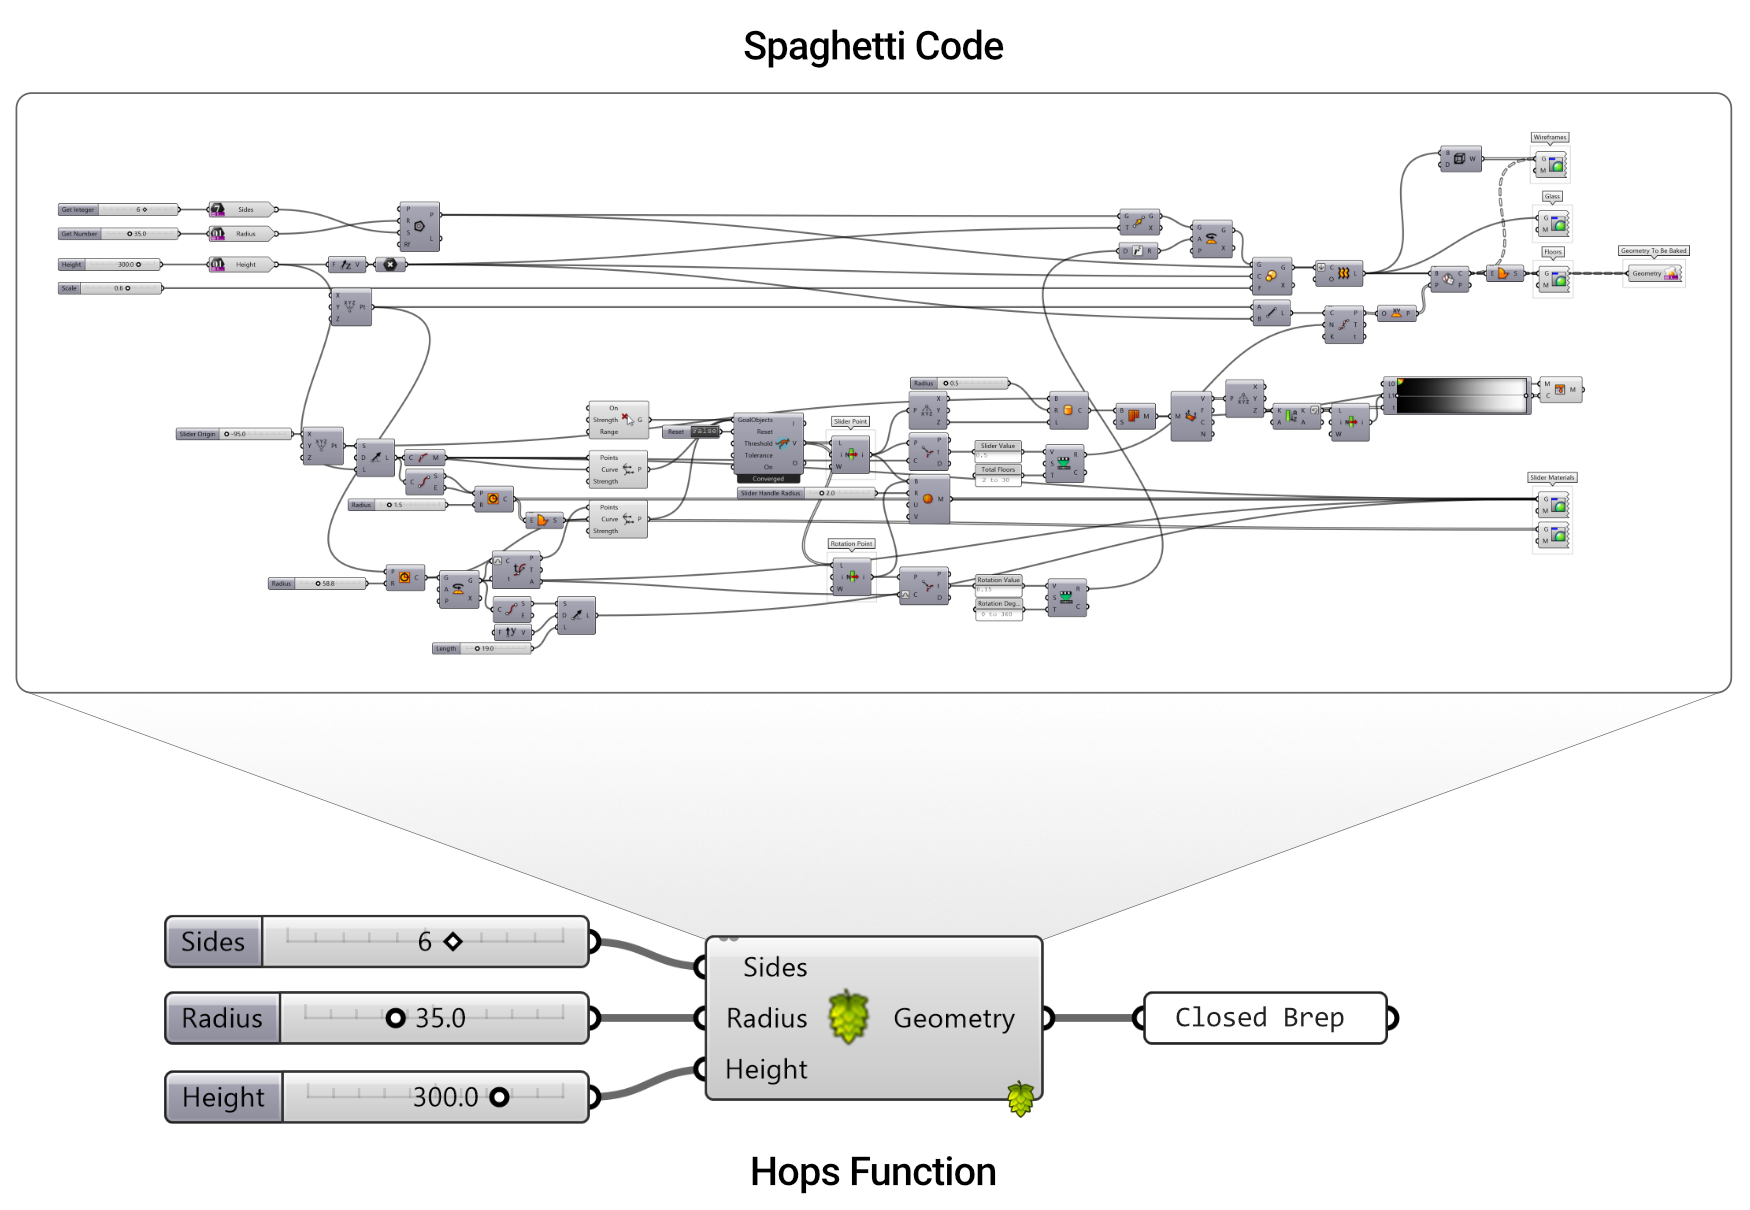 /images/hops_spaghetti_code_1.png